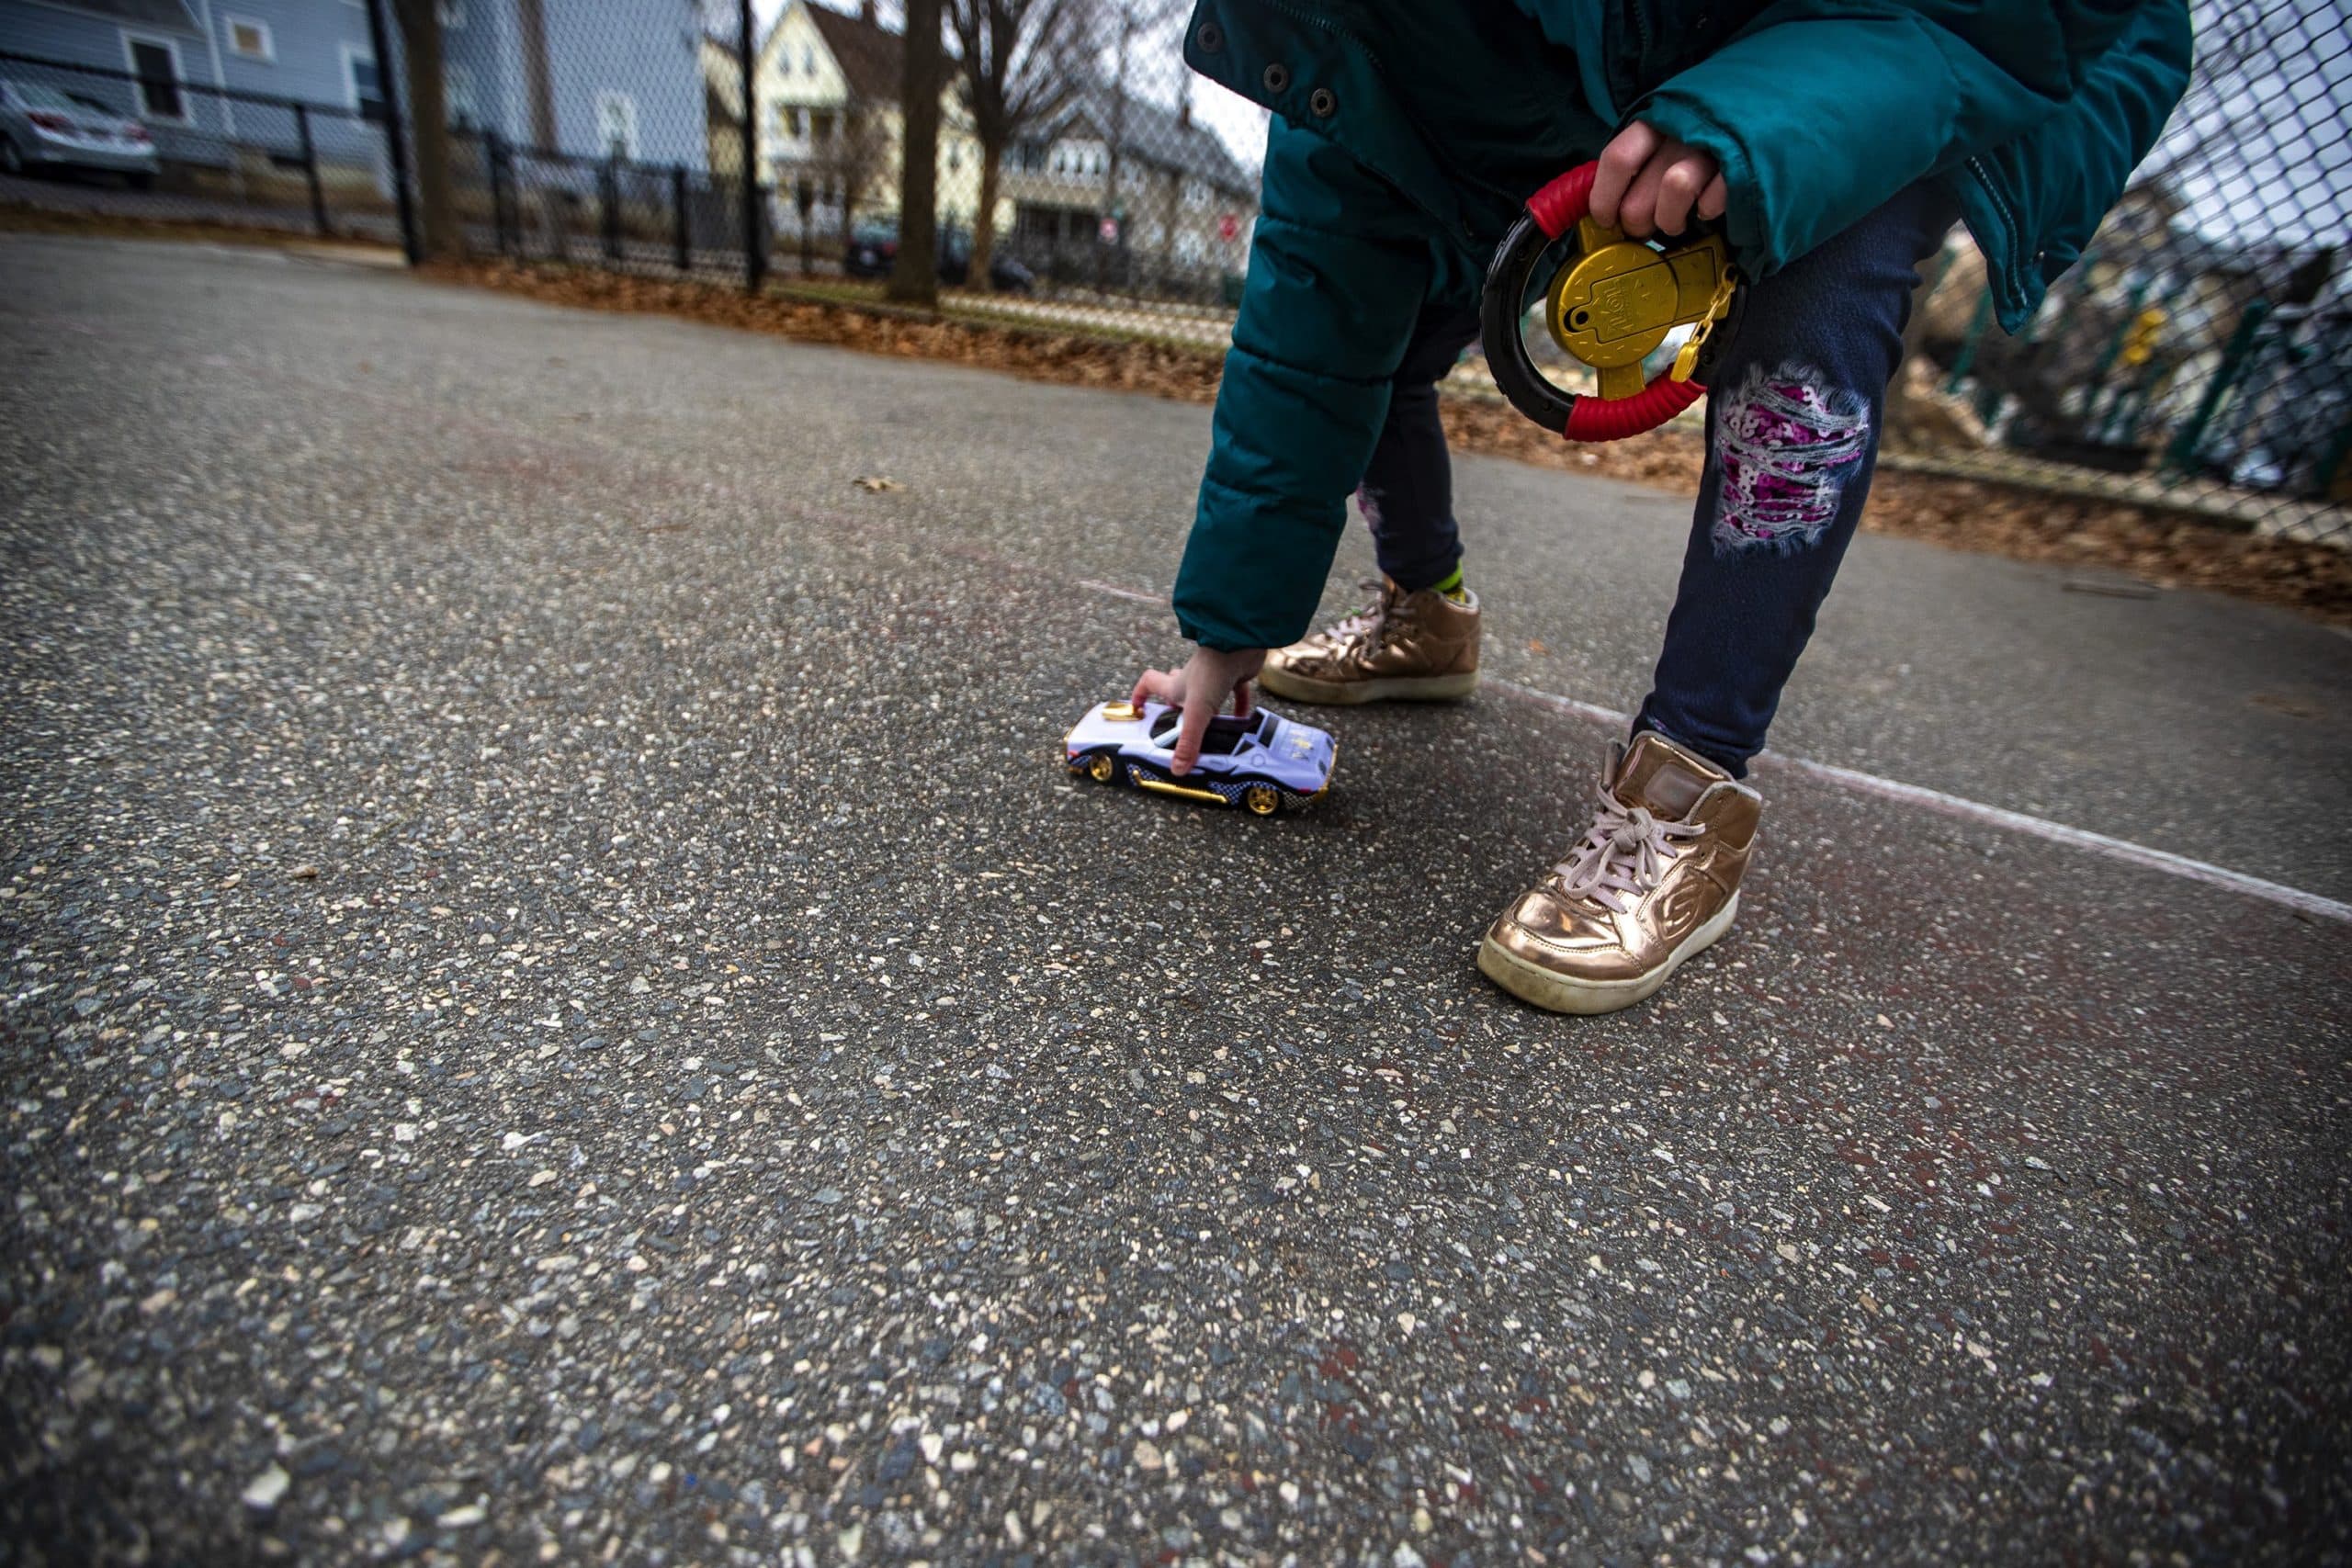 Hallel places their remote control car on to the ground while playing in the playground. (Jesse Costa/WBUR)